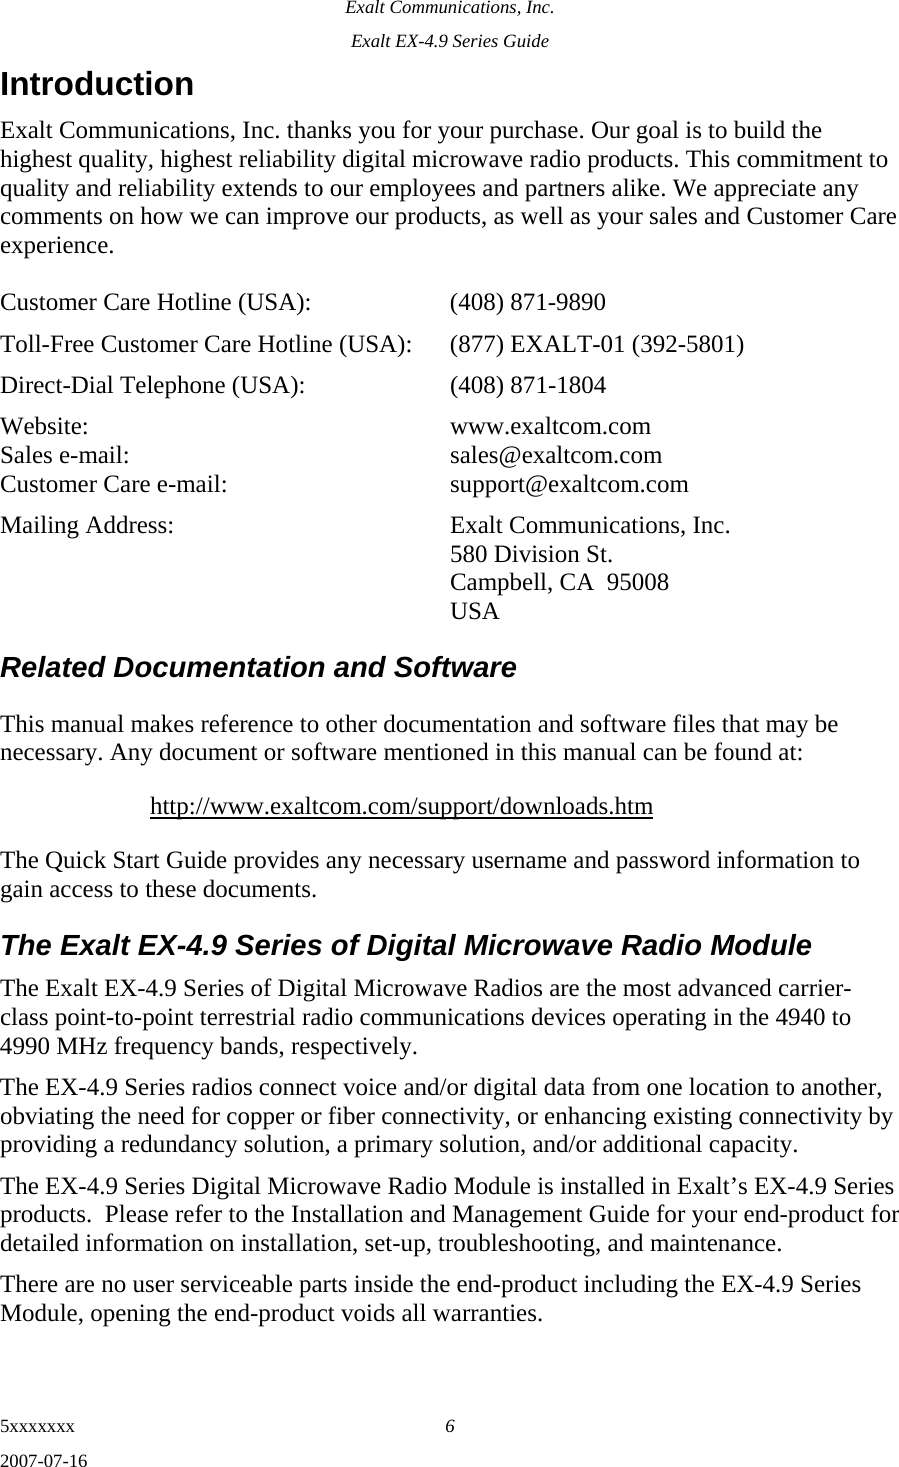 Exalt Communications, Inc. Exalt EX-4.9 Series Guide 5xxxxxxx  6 2007-07-16 Introduction Exalt Communications, Inc. thanks you for your purchase. Our goal is to build the highest quality, highest reliability digital microwave radio products. This commitment to quality and reliability extends to our employees and partners alike. We appreciate any comments on how we can improve our products, as well as your sales and Customer Care experience.  Customer Care Hotline (USA):    (408) 871-9890 Toll-Free Customer Care Hotline (USA):  (877) EXALT-01 (392-5801) Direct-Dial Telephone (USA):    (408) 871-1804 Website:  www.exaltcom.com Sales e-mail:    sales@exaltcom.com Customer Care e-mail:    support@exaltcom.com Mailing Address:    Exalt Communications, Inc.     580 Division St.     Campbell, CA  95008   USA Related Documentation and Software This manual makes reference to other documentation and software files that may be necessary. Any document or software mentioned in this manual can be found at: http://www.exaltcom.com/support/downloads.htm The Quick Start Guide provides any necessary username and password information to gain access to these documents. The Exalt EX-4.9 Series of Digital Microwave Radio Module The Exalt EX-4.9 Series of Digital Microwave Radios are the most advanced carrier-class point-to-point terrestrial radio communications devices operating in the 4940 to 4990 MHz frequency bands, respectively. The EX-4.9 Series radios connect voice and/or digital data from one location to another, obviating the need for copper or fiber connectivity, or enhancing existing connectivity by providing a redundancy solution, a primary solution, and/or additional capacity. The EX-4.9 Series Digital Microwave Radio Module is installed in Exalt’s EX-4.9 Series products.  Please refer to the Installation and Management Guide for your end-product for detailed information on installation, set-up, troubleshooting, and maintenance. There are no user serviceable parts inside the end-product including the EX-4.9 Series Module, opening the end-product voids all warranties.   